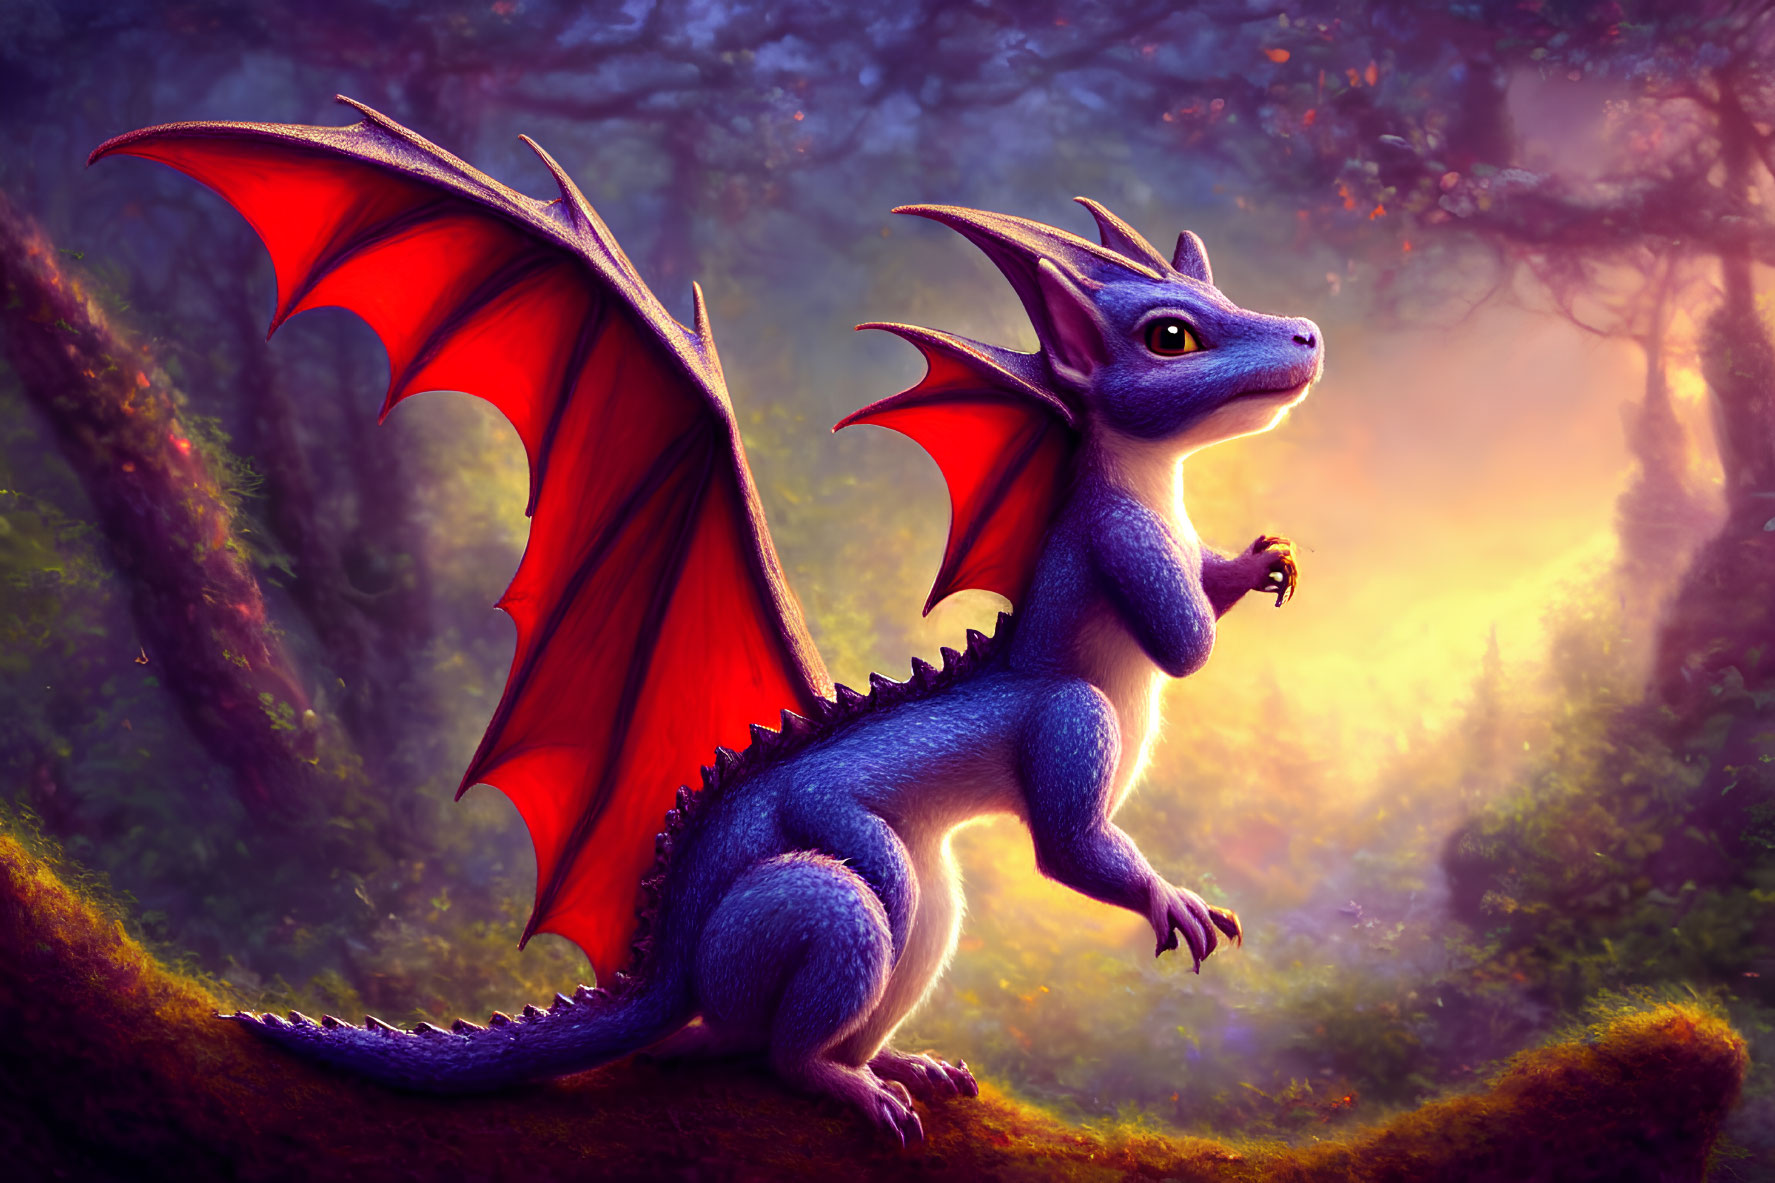 Blue dragon with red wings in mystical forest scene.